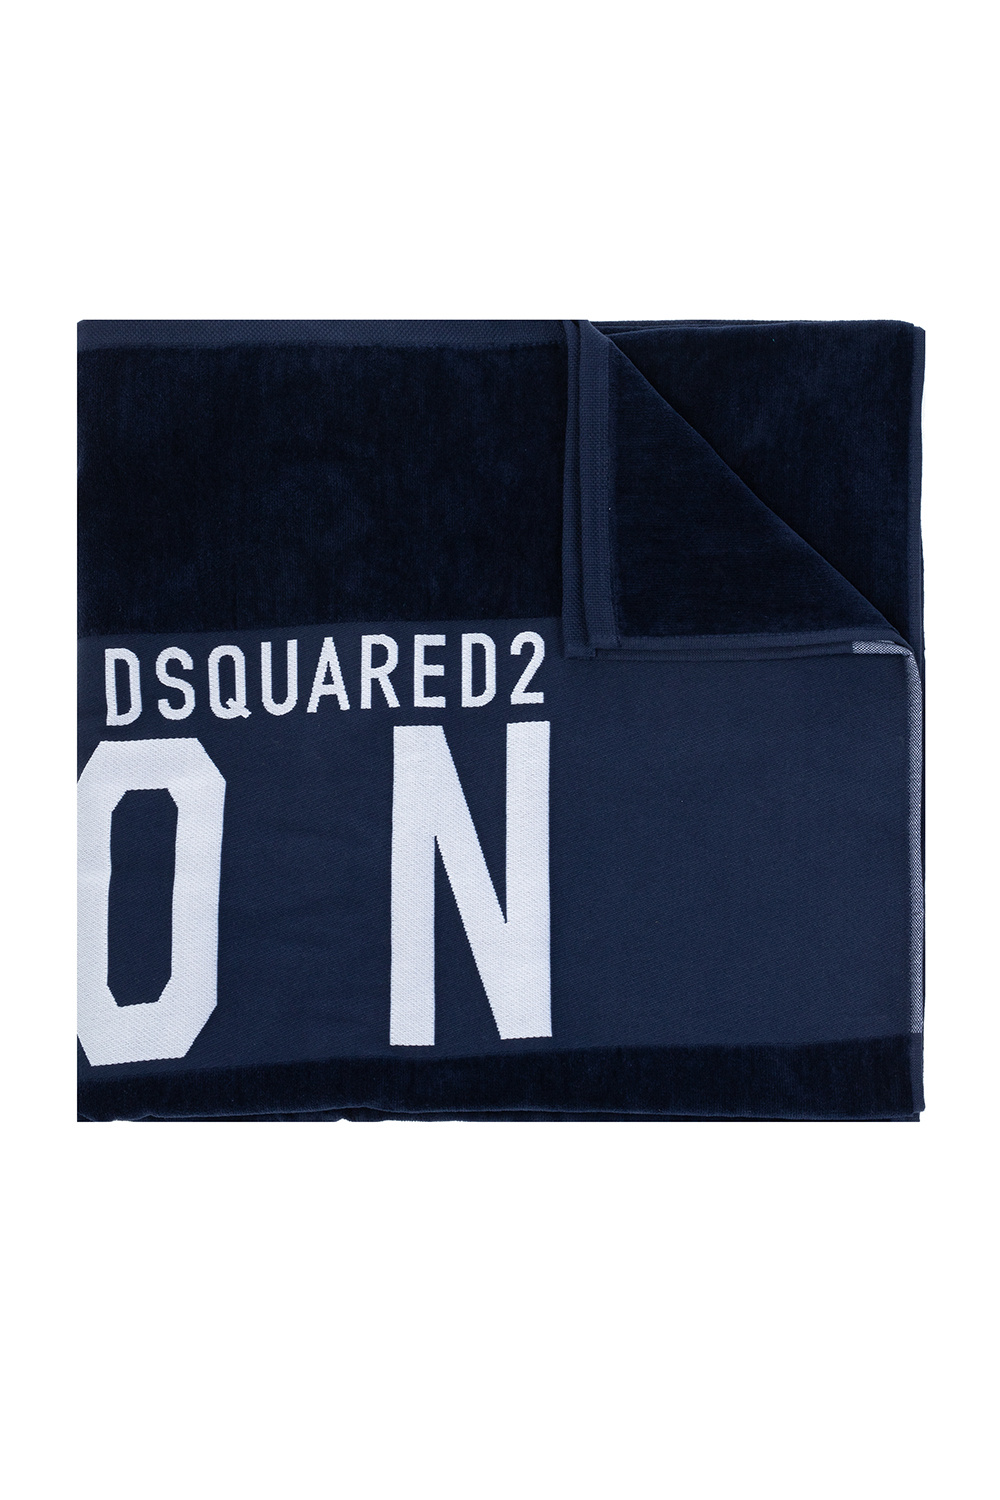 Dsquared2 Add to bag